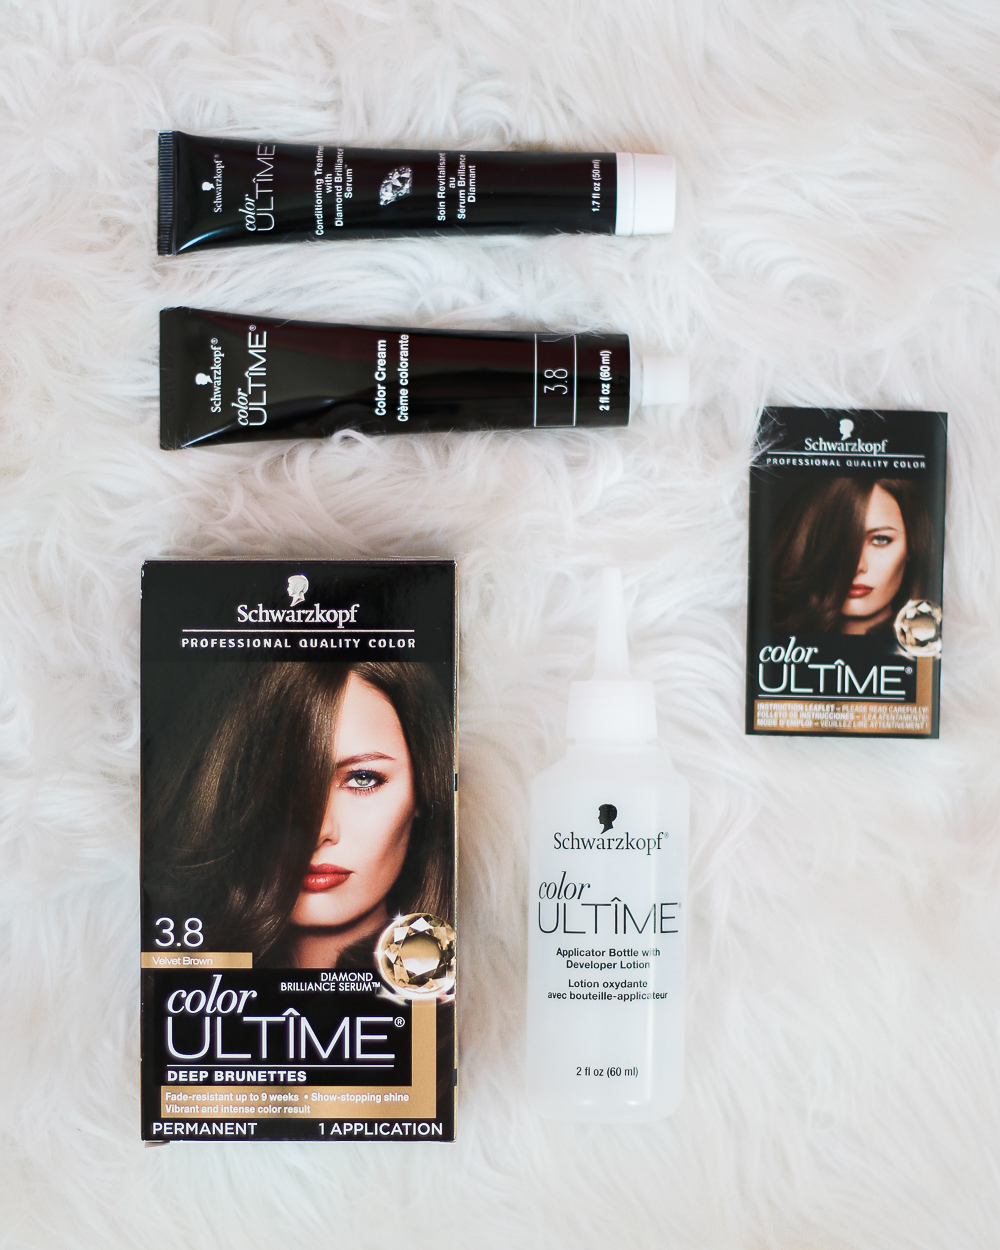 Schwarzkopf Fall Hair Refresh by popular beauty blogger Stephanie Ziajka on Diary of a Debutante, Schwarzkopf Color ULTIME in 3.8 Velvet Brown results, at home hair color tips